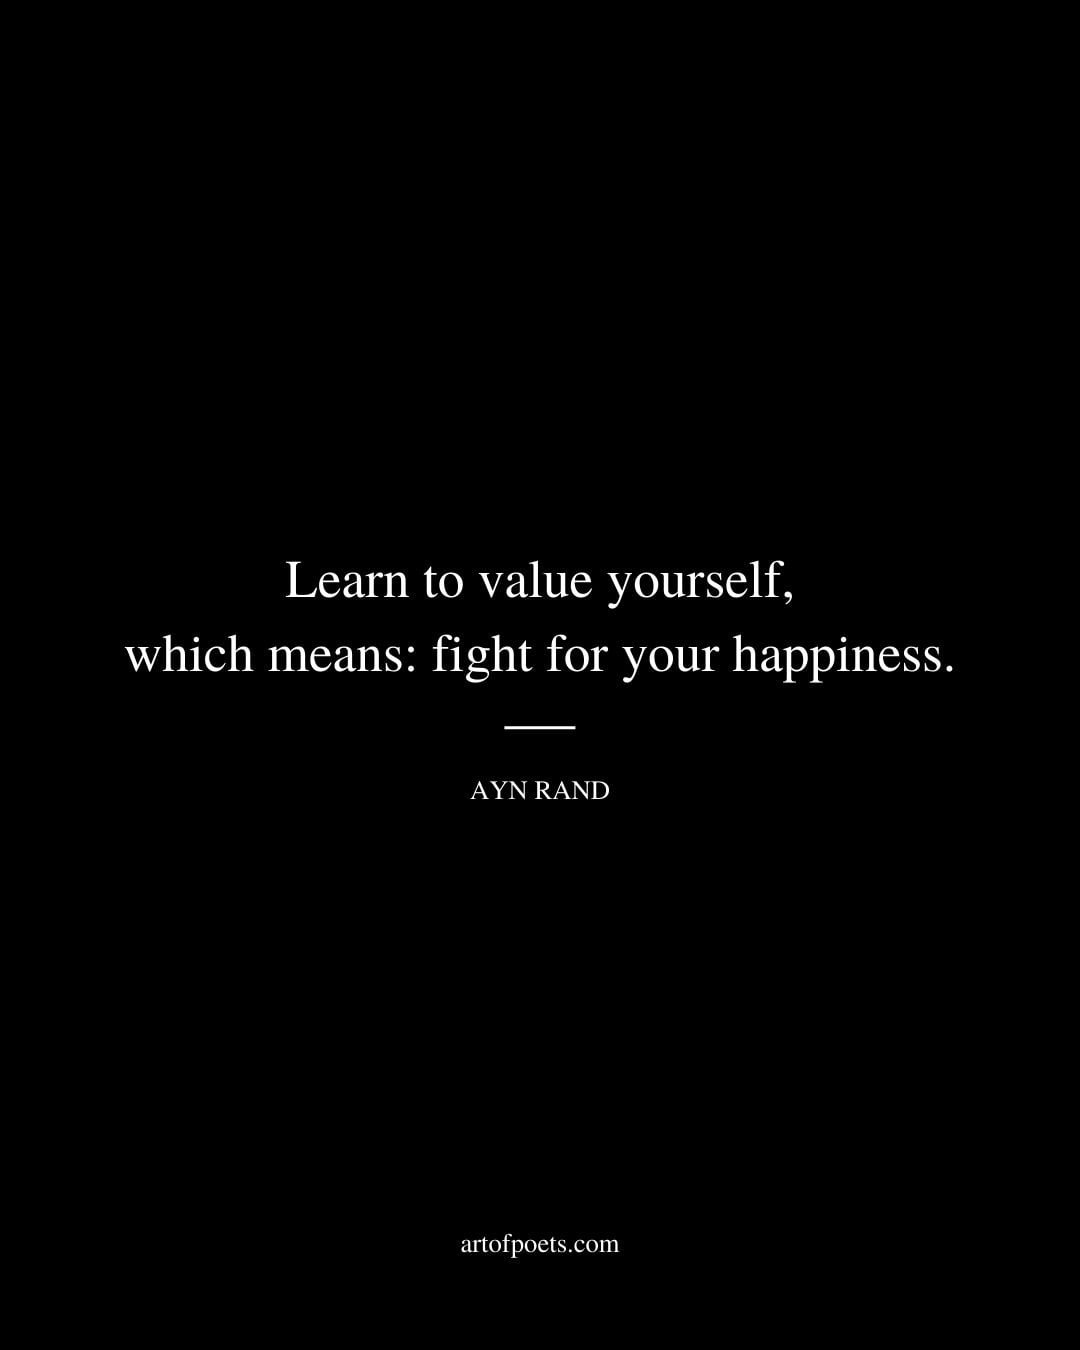 Learn to value yourself which means fight for your happiness